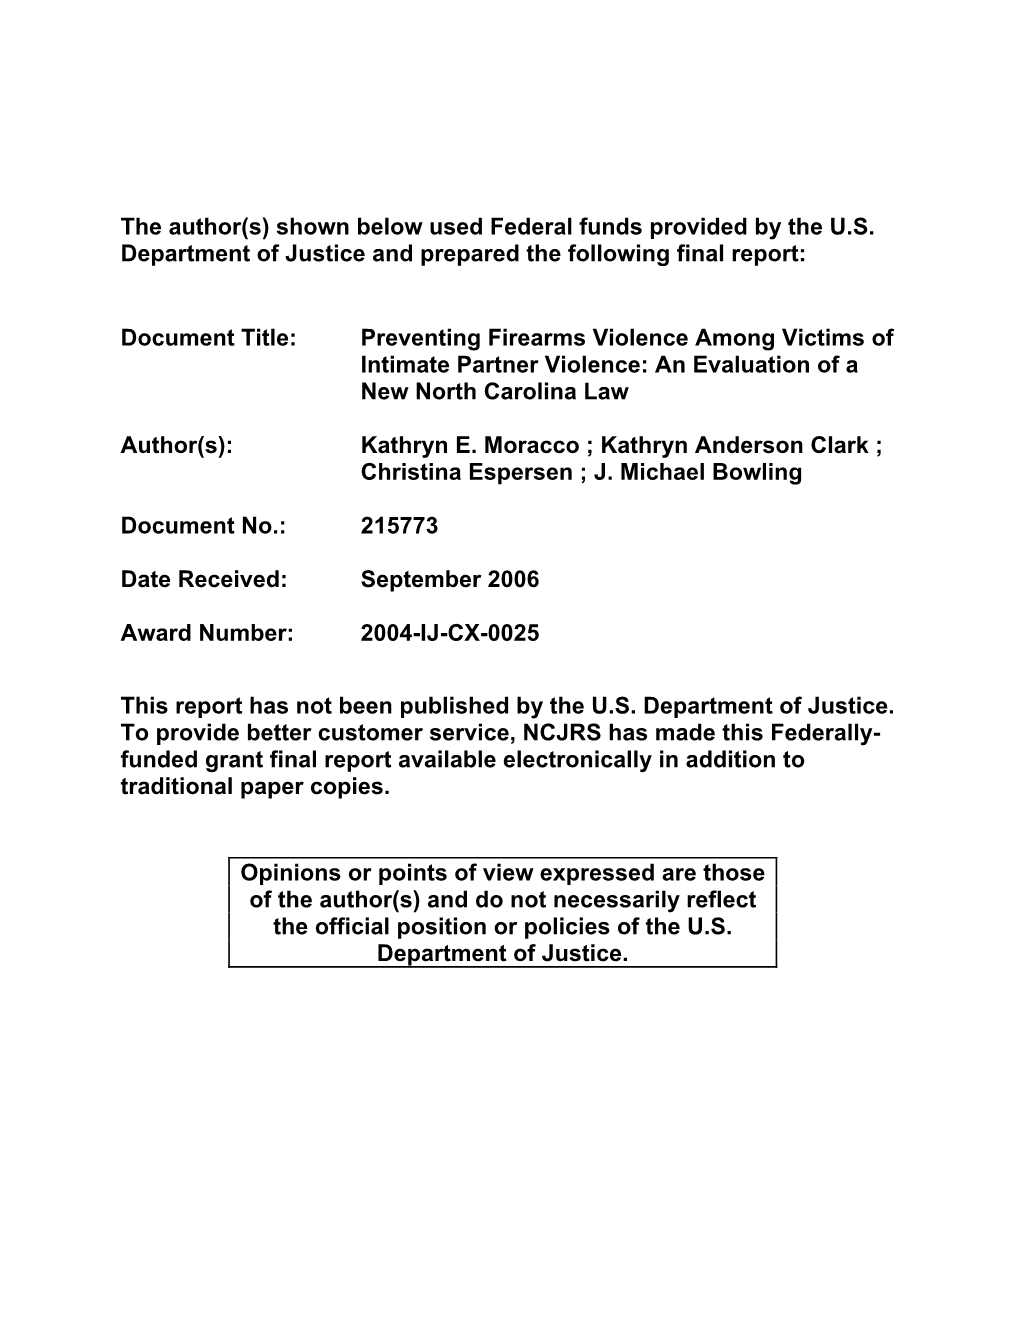 Preventing Firearms Violence Among Victims of Intimate Partner Violence: an Evaluation of a New North Carolina Law